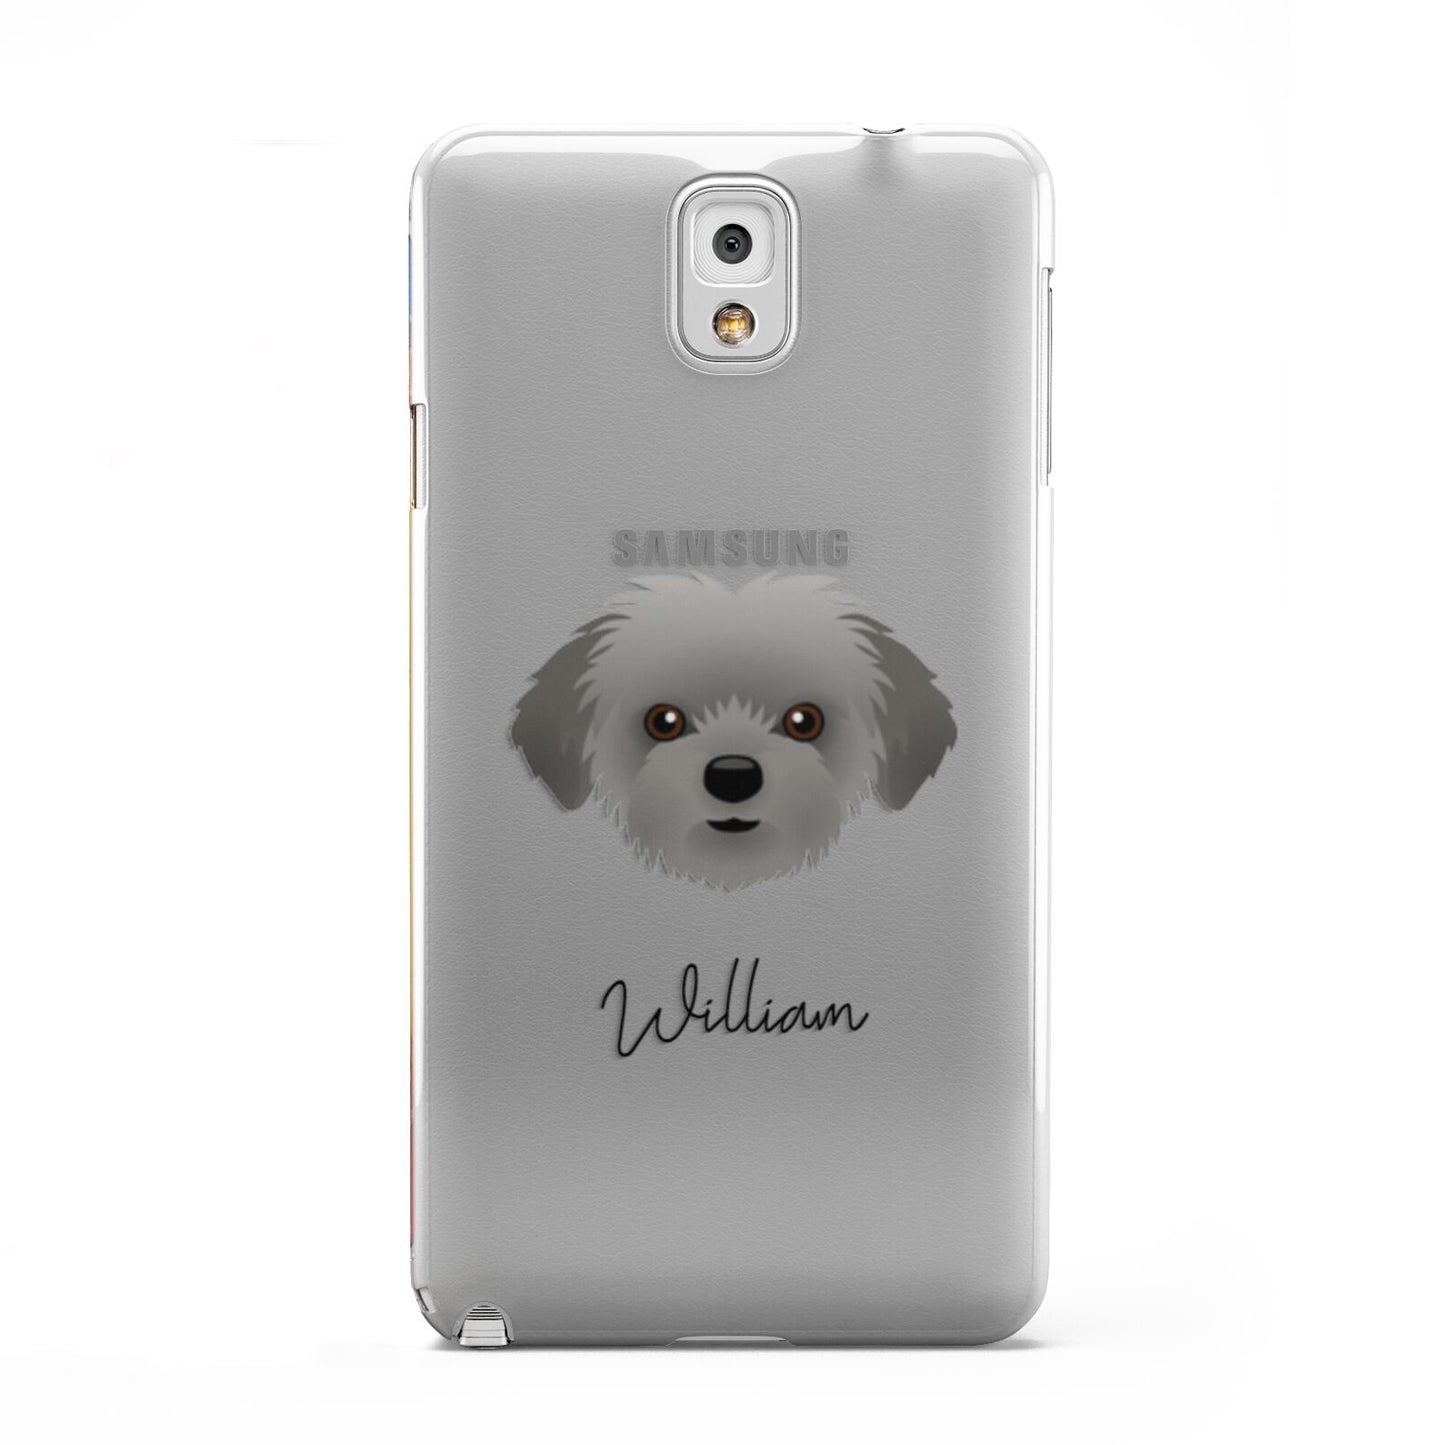 Shorkie Personalised Samsung Galaxy Note 3 Case